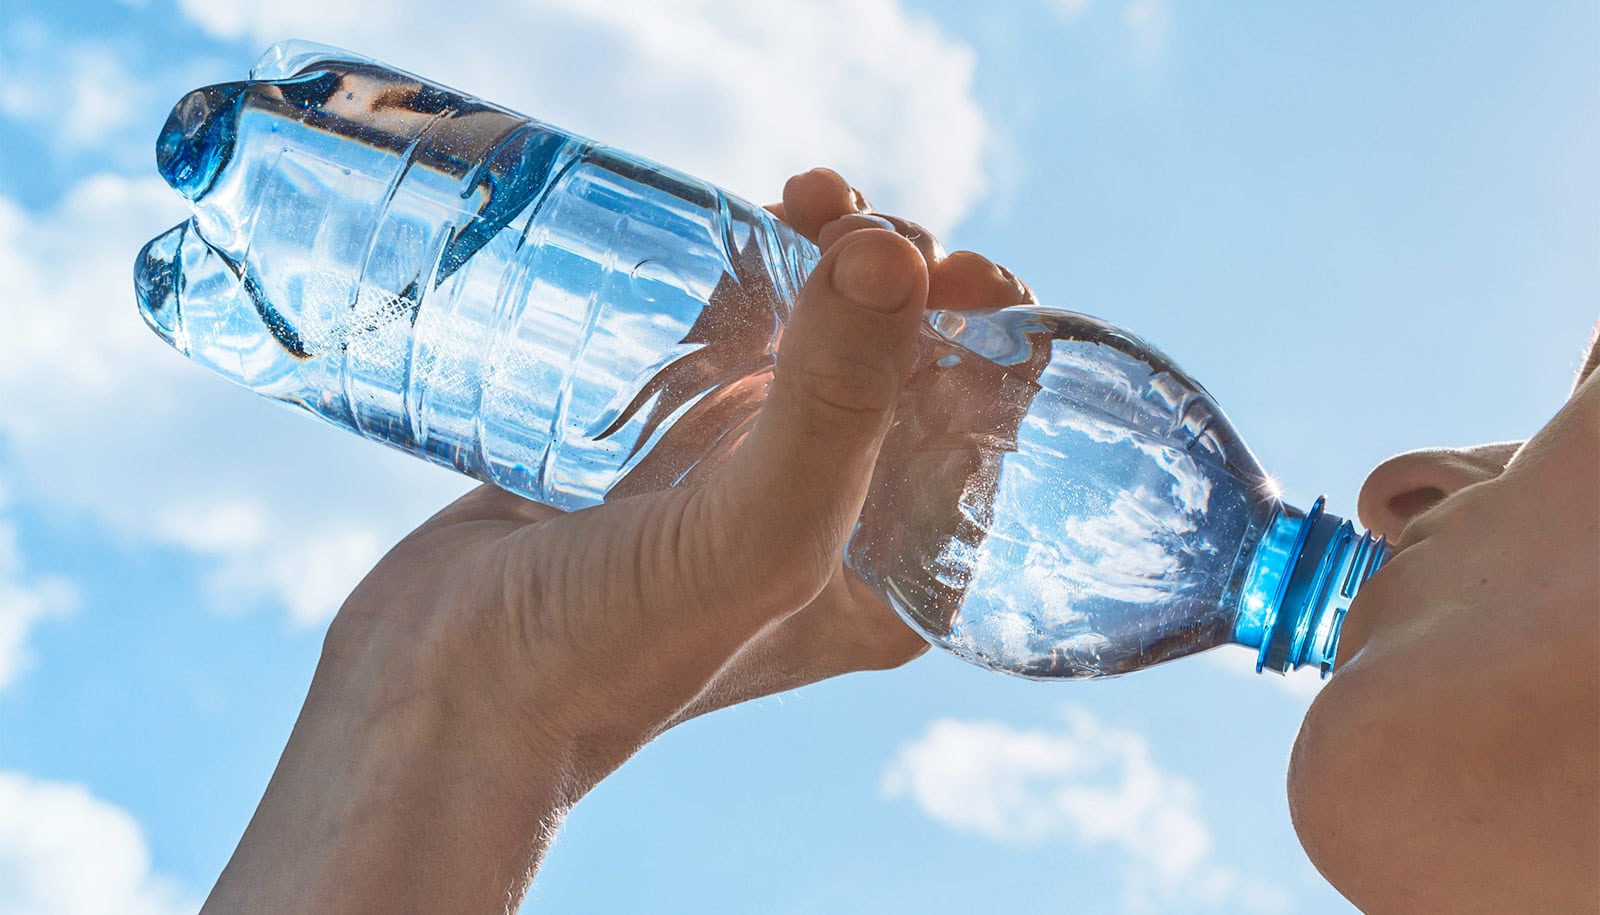 Drink 8 Glasses of Water a Day: Fact or Fiction?